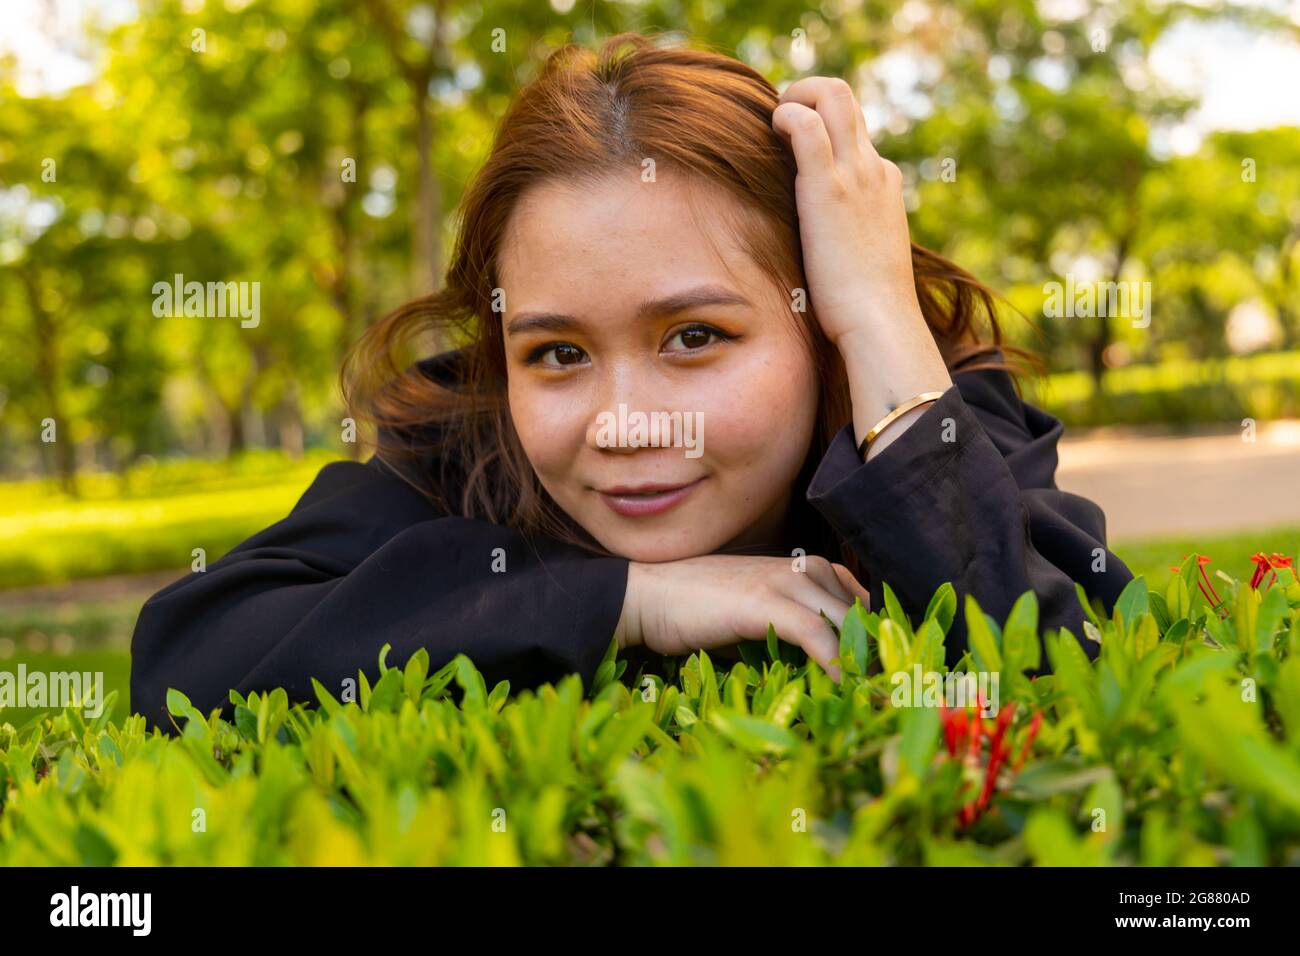 An attractive South Asian female wearing a black formal coat hiding among flowers in the park Stock Photo